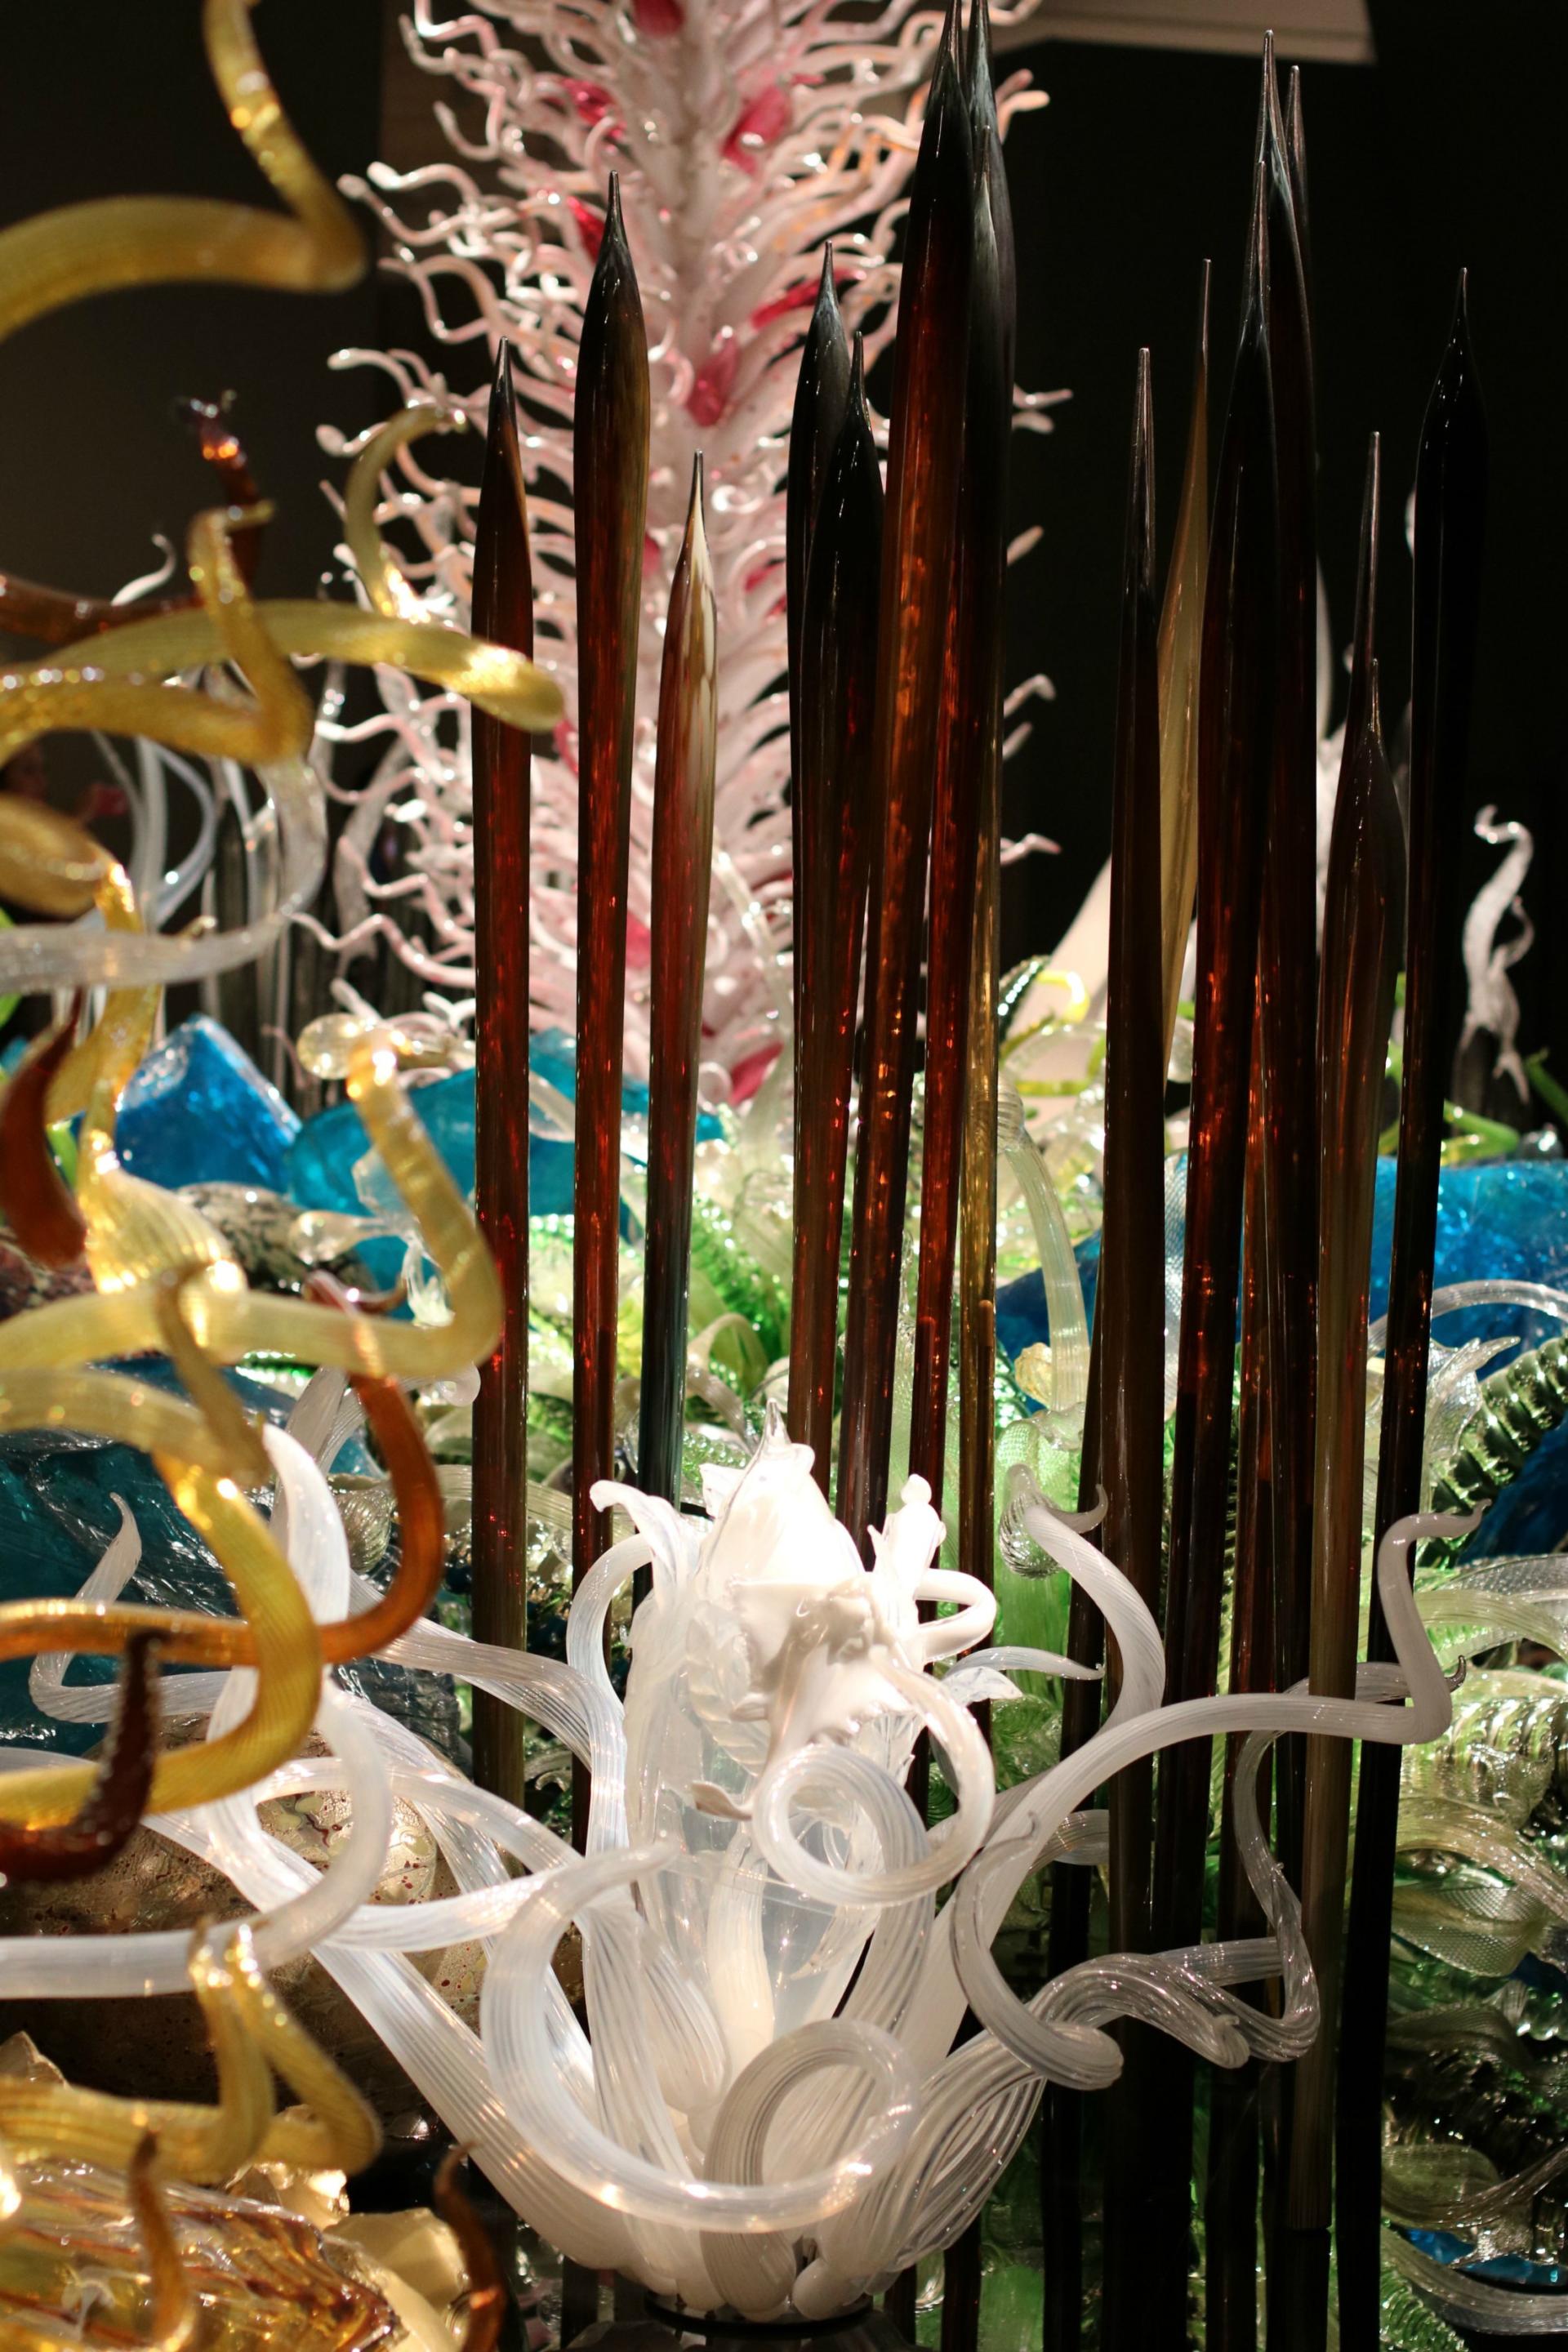 Chihuly At The Royal Ontario Museum